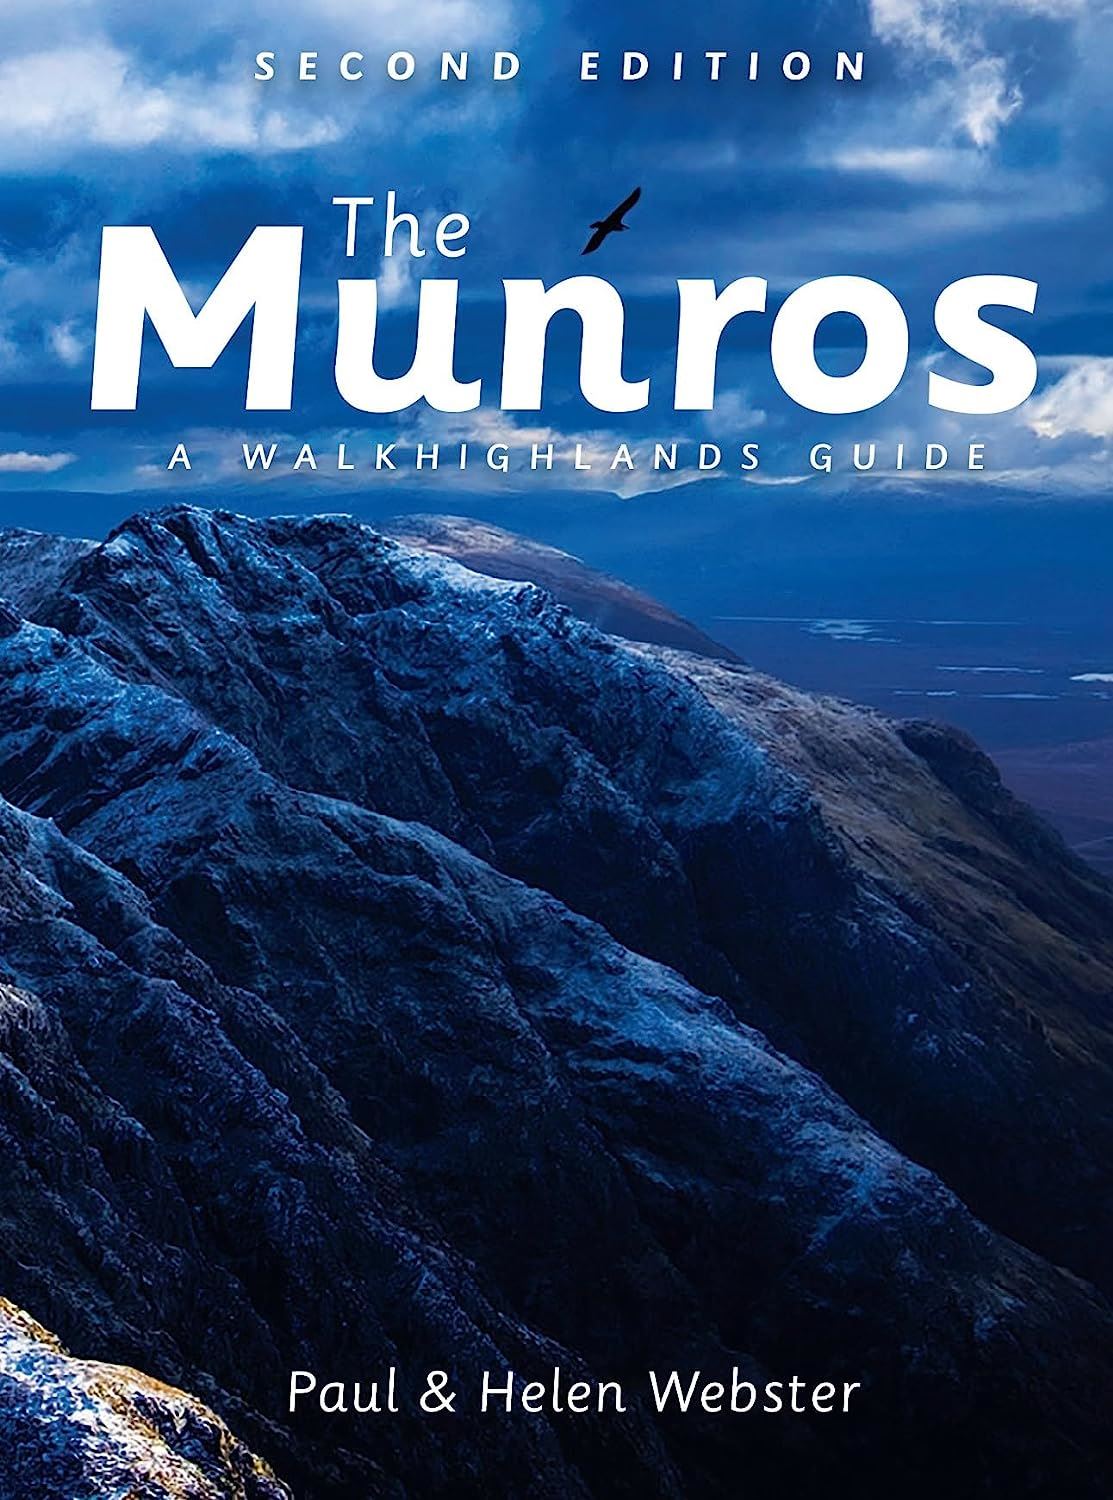 The Munros A Walk Highlands Guide 2nd Edition